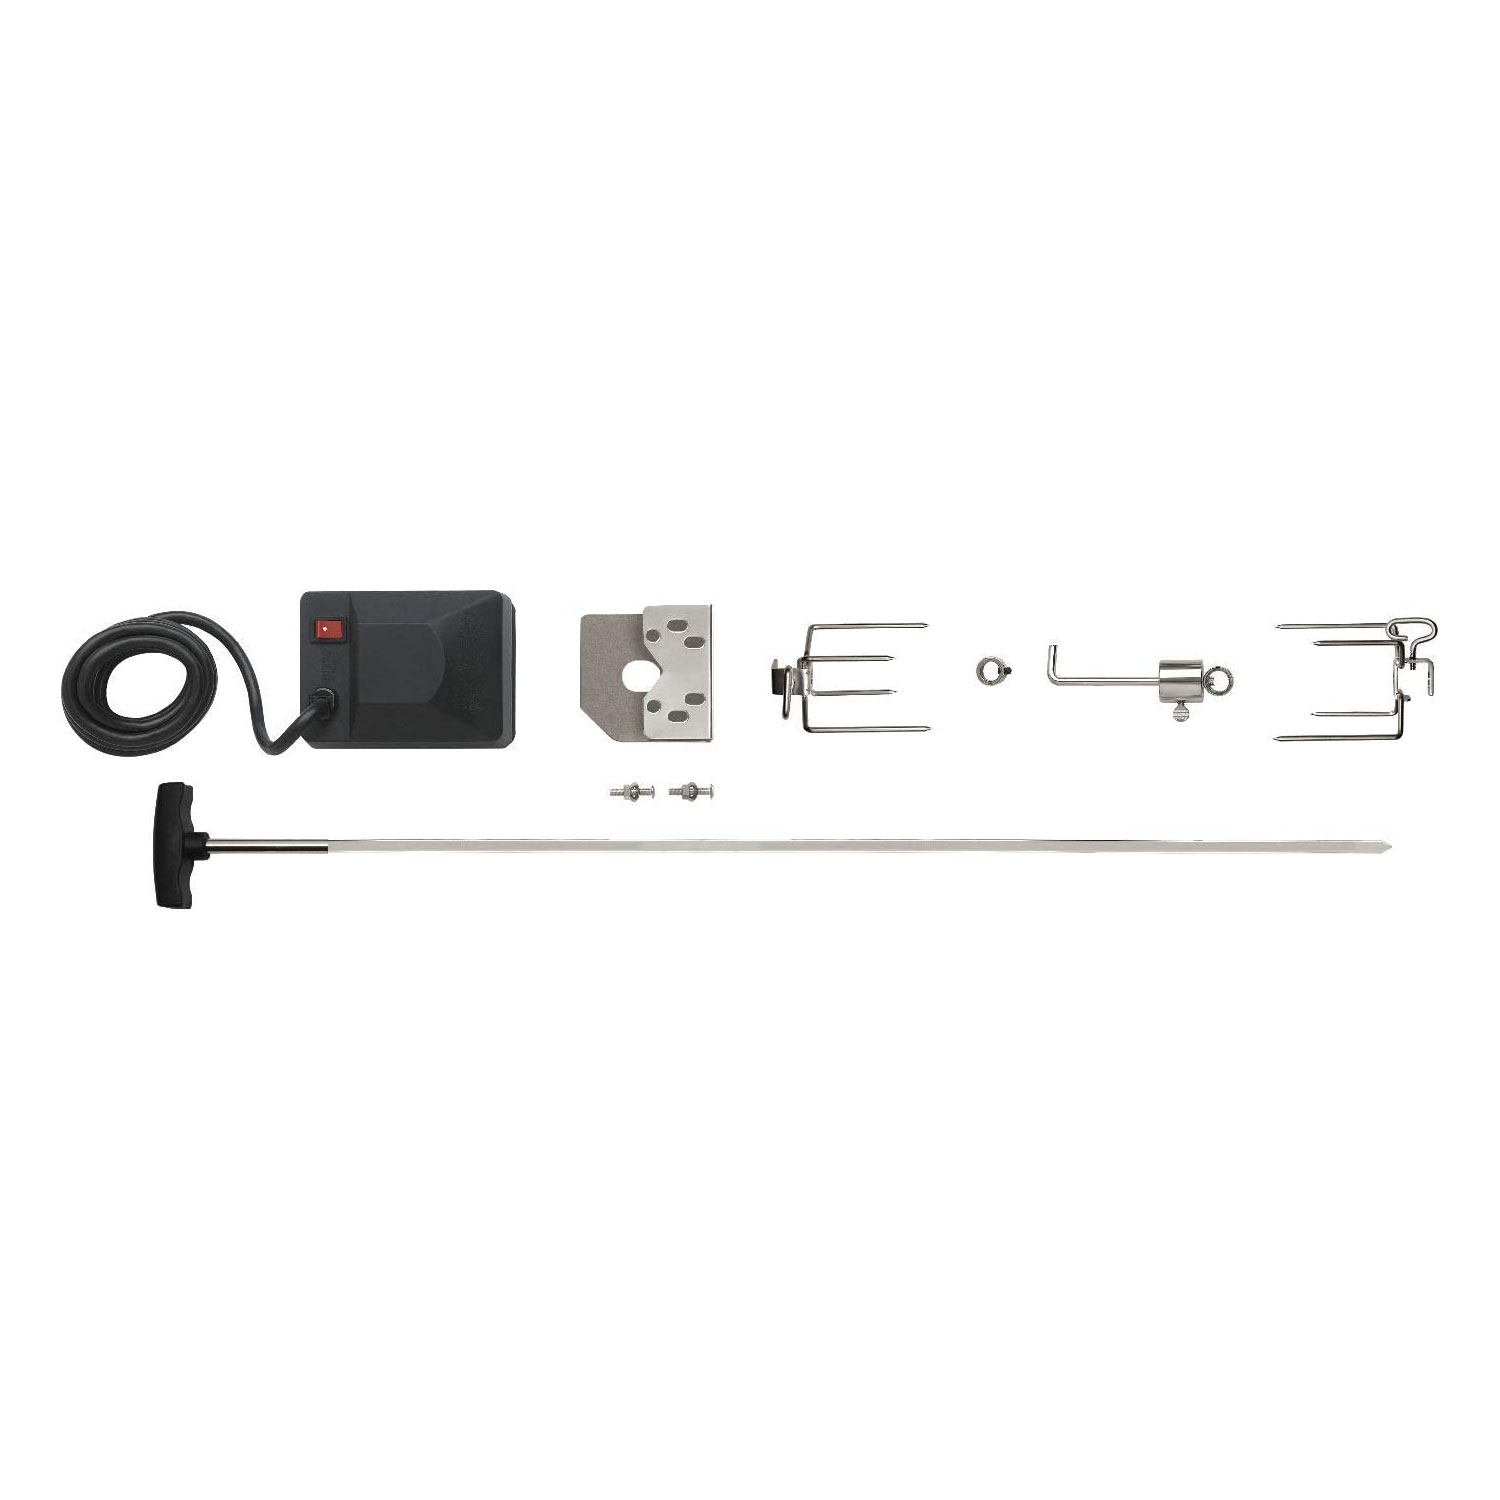 Heavy Duty Rotisserie Kit for Large Grills - image 1 of 3